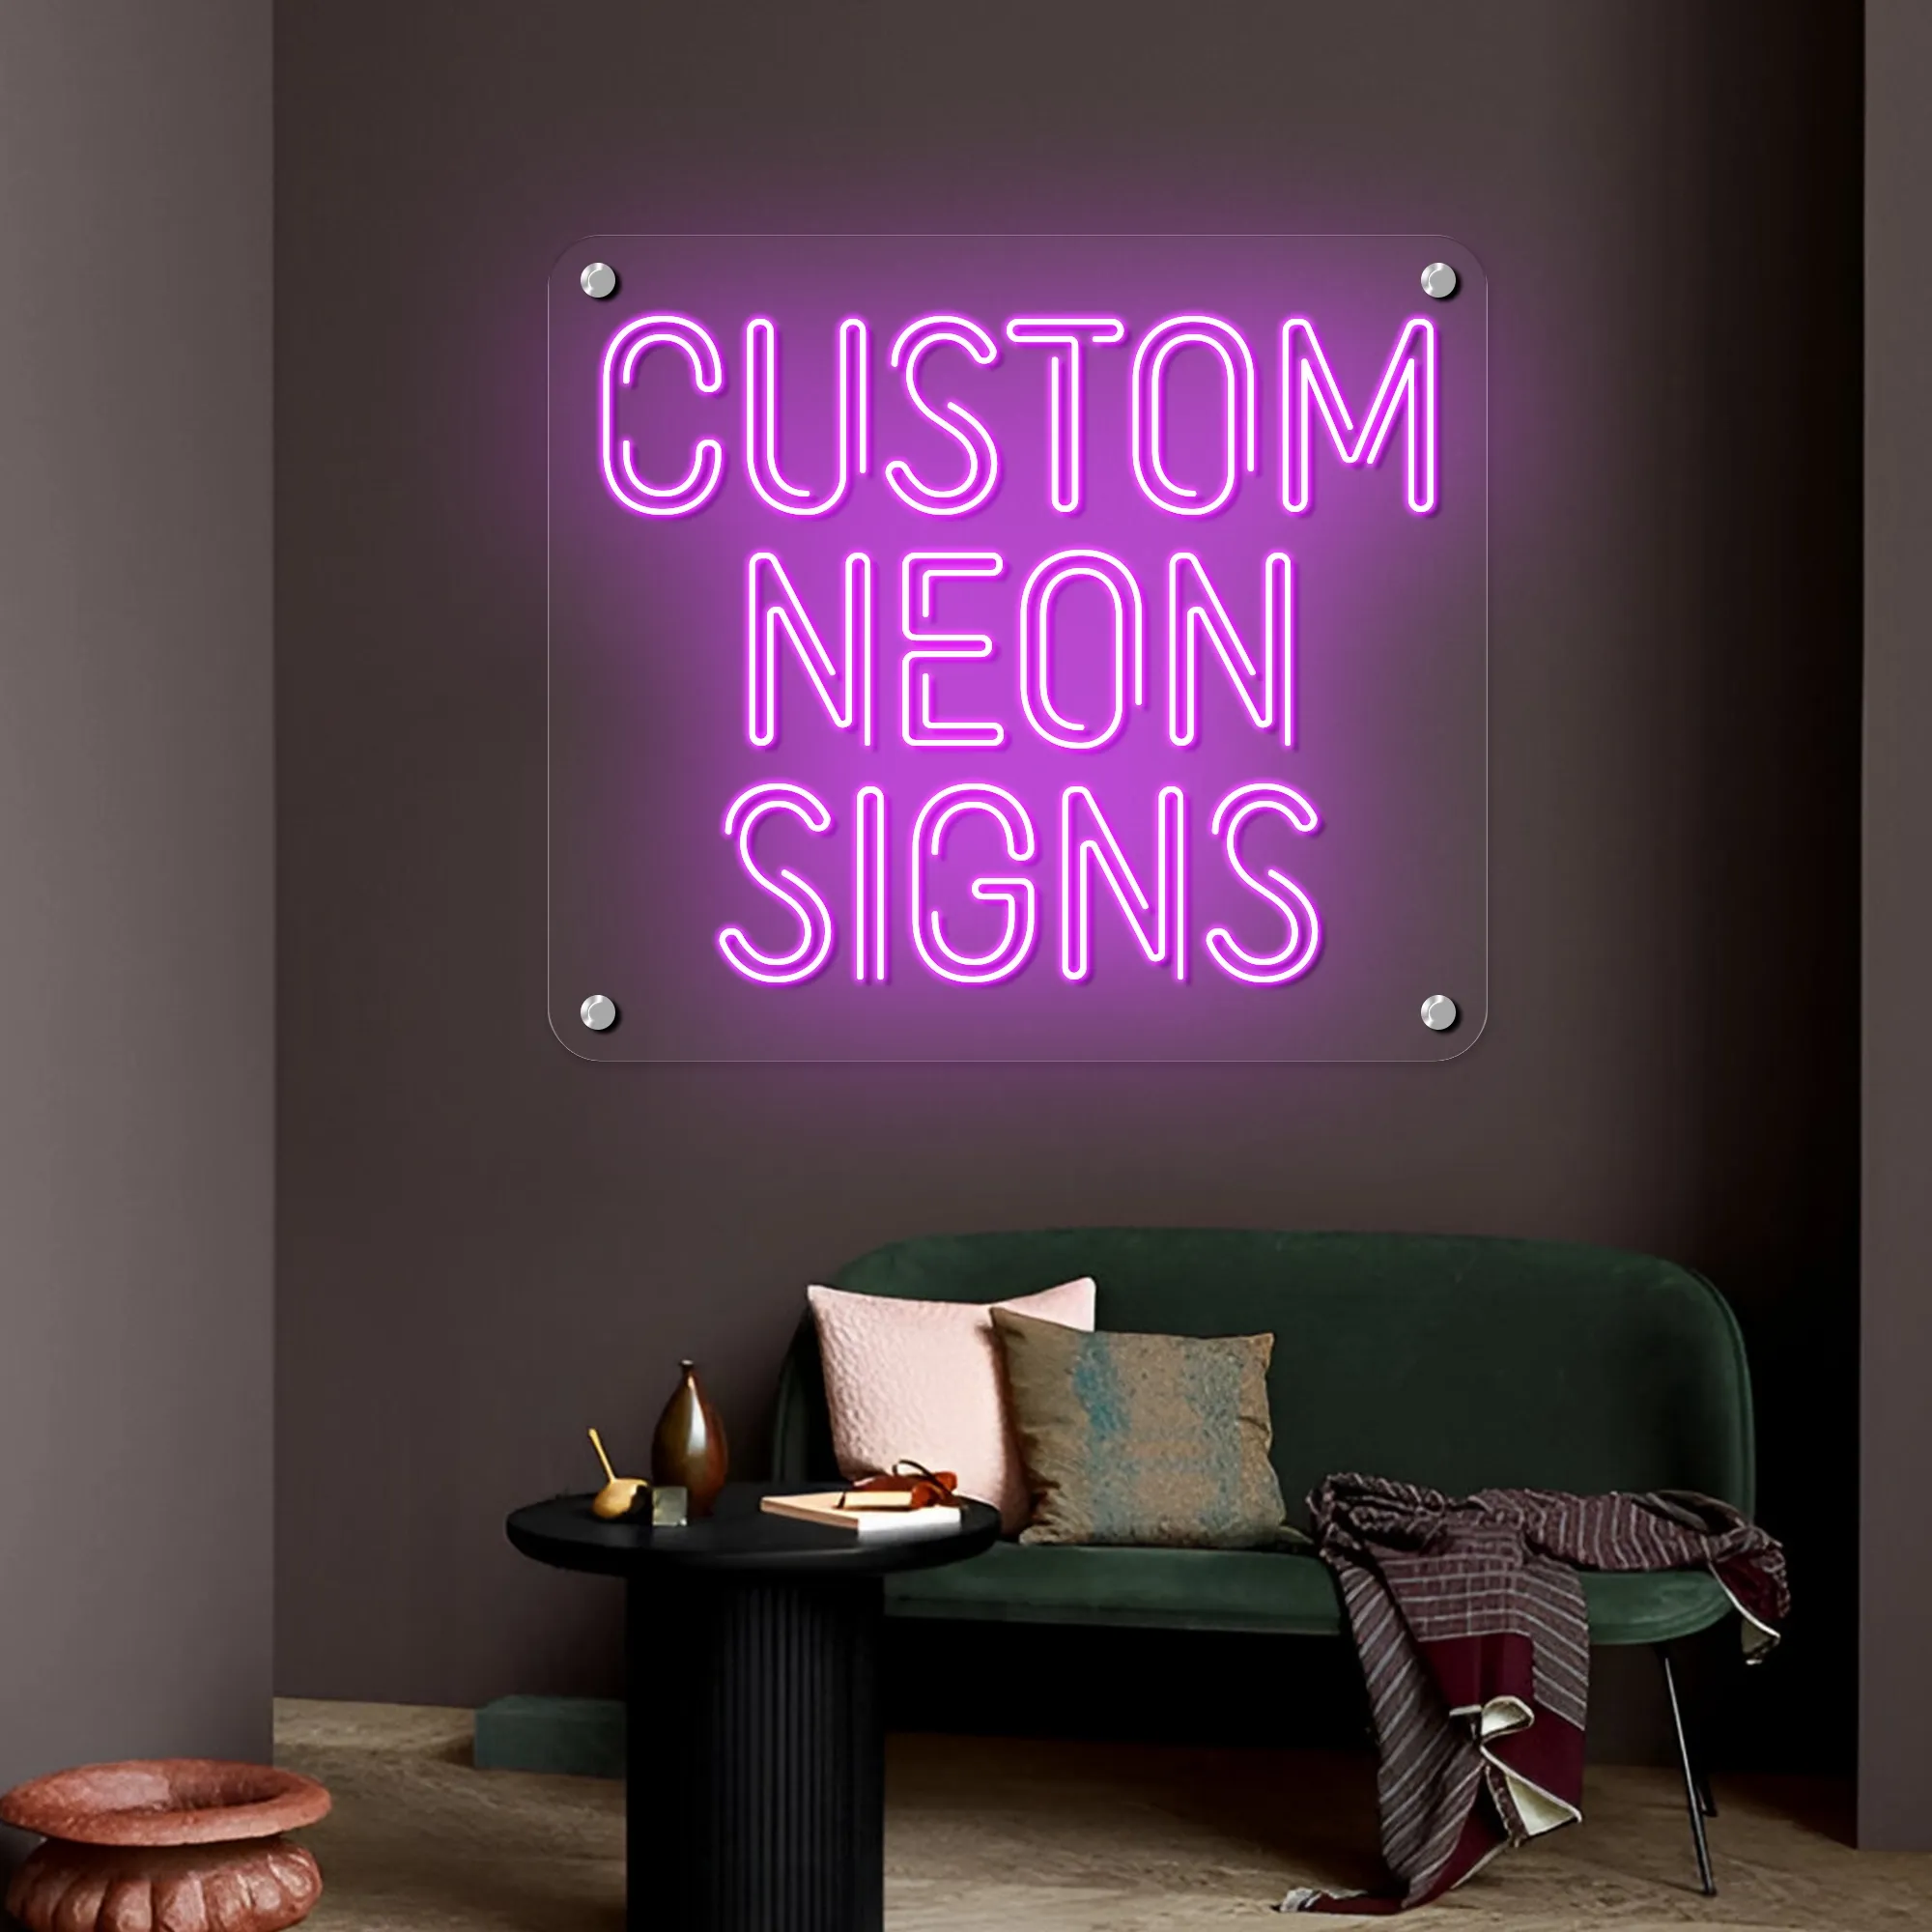 Neon Signs - Custom Aprons Now